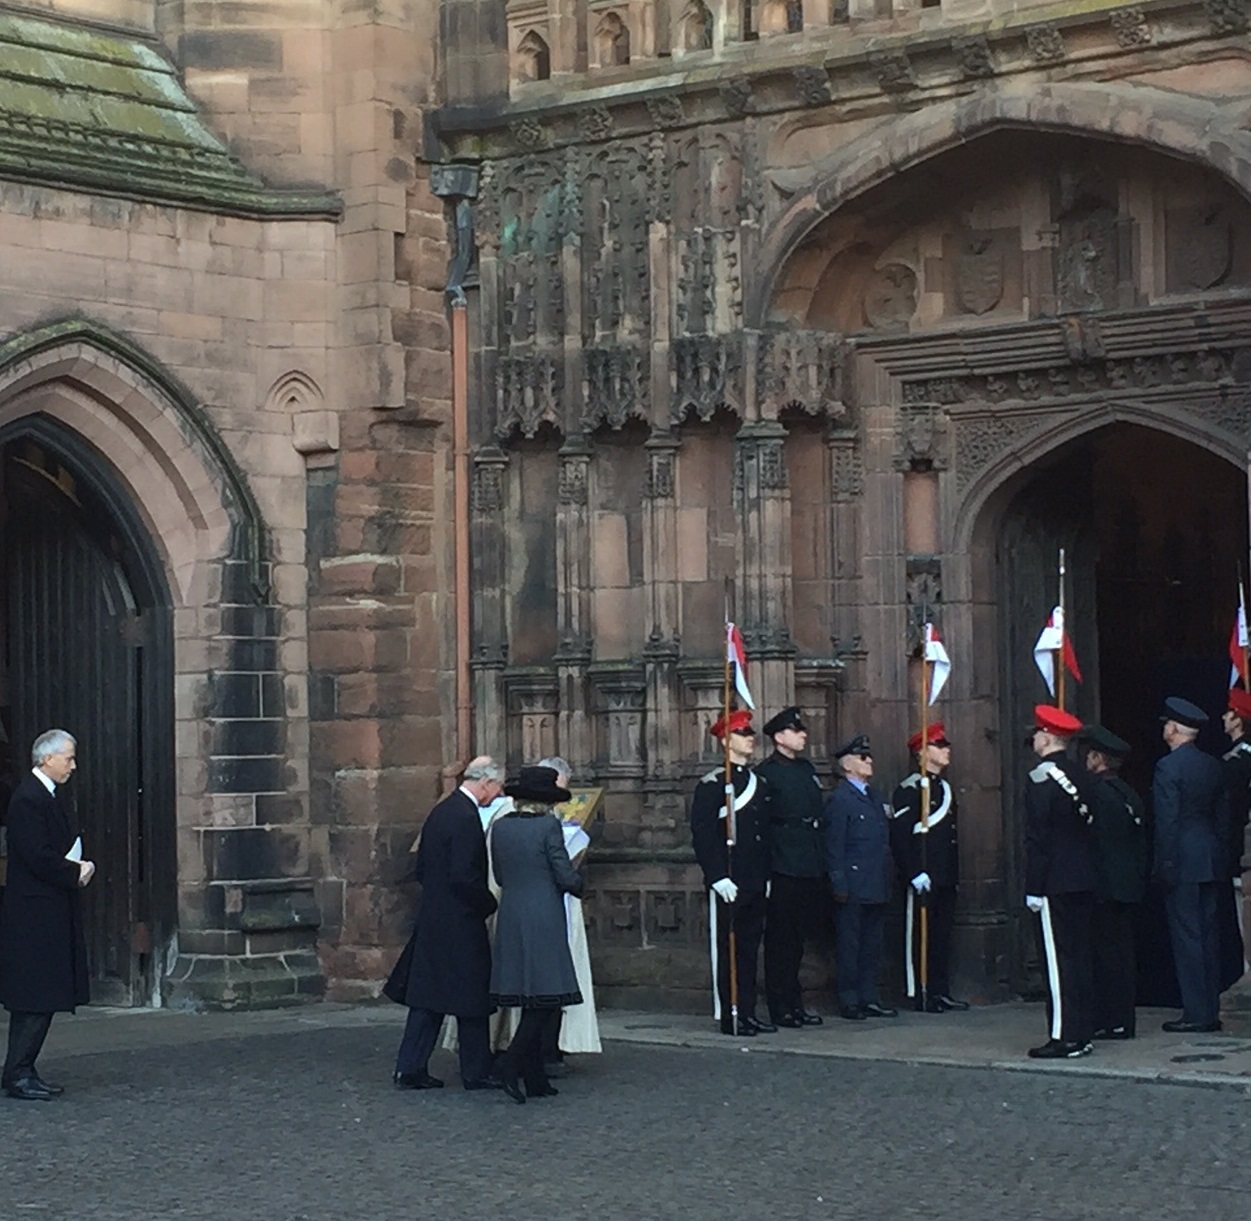 Prince Charles and Duchess of Cornwall are greeted by Dean of Chester